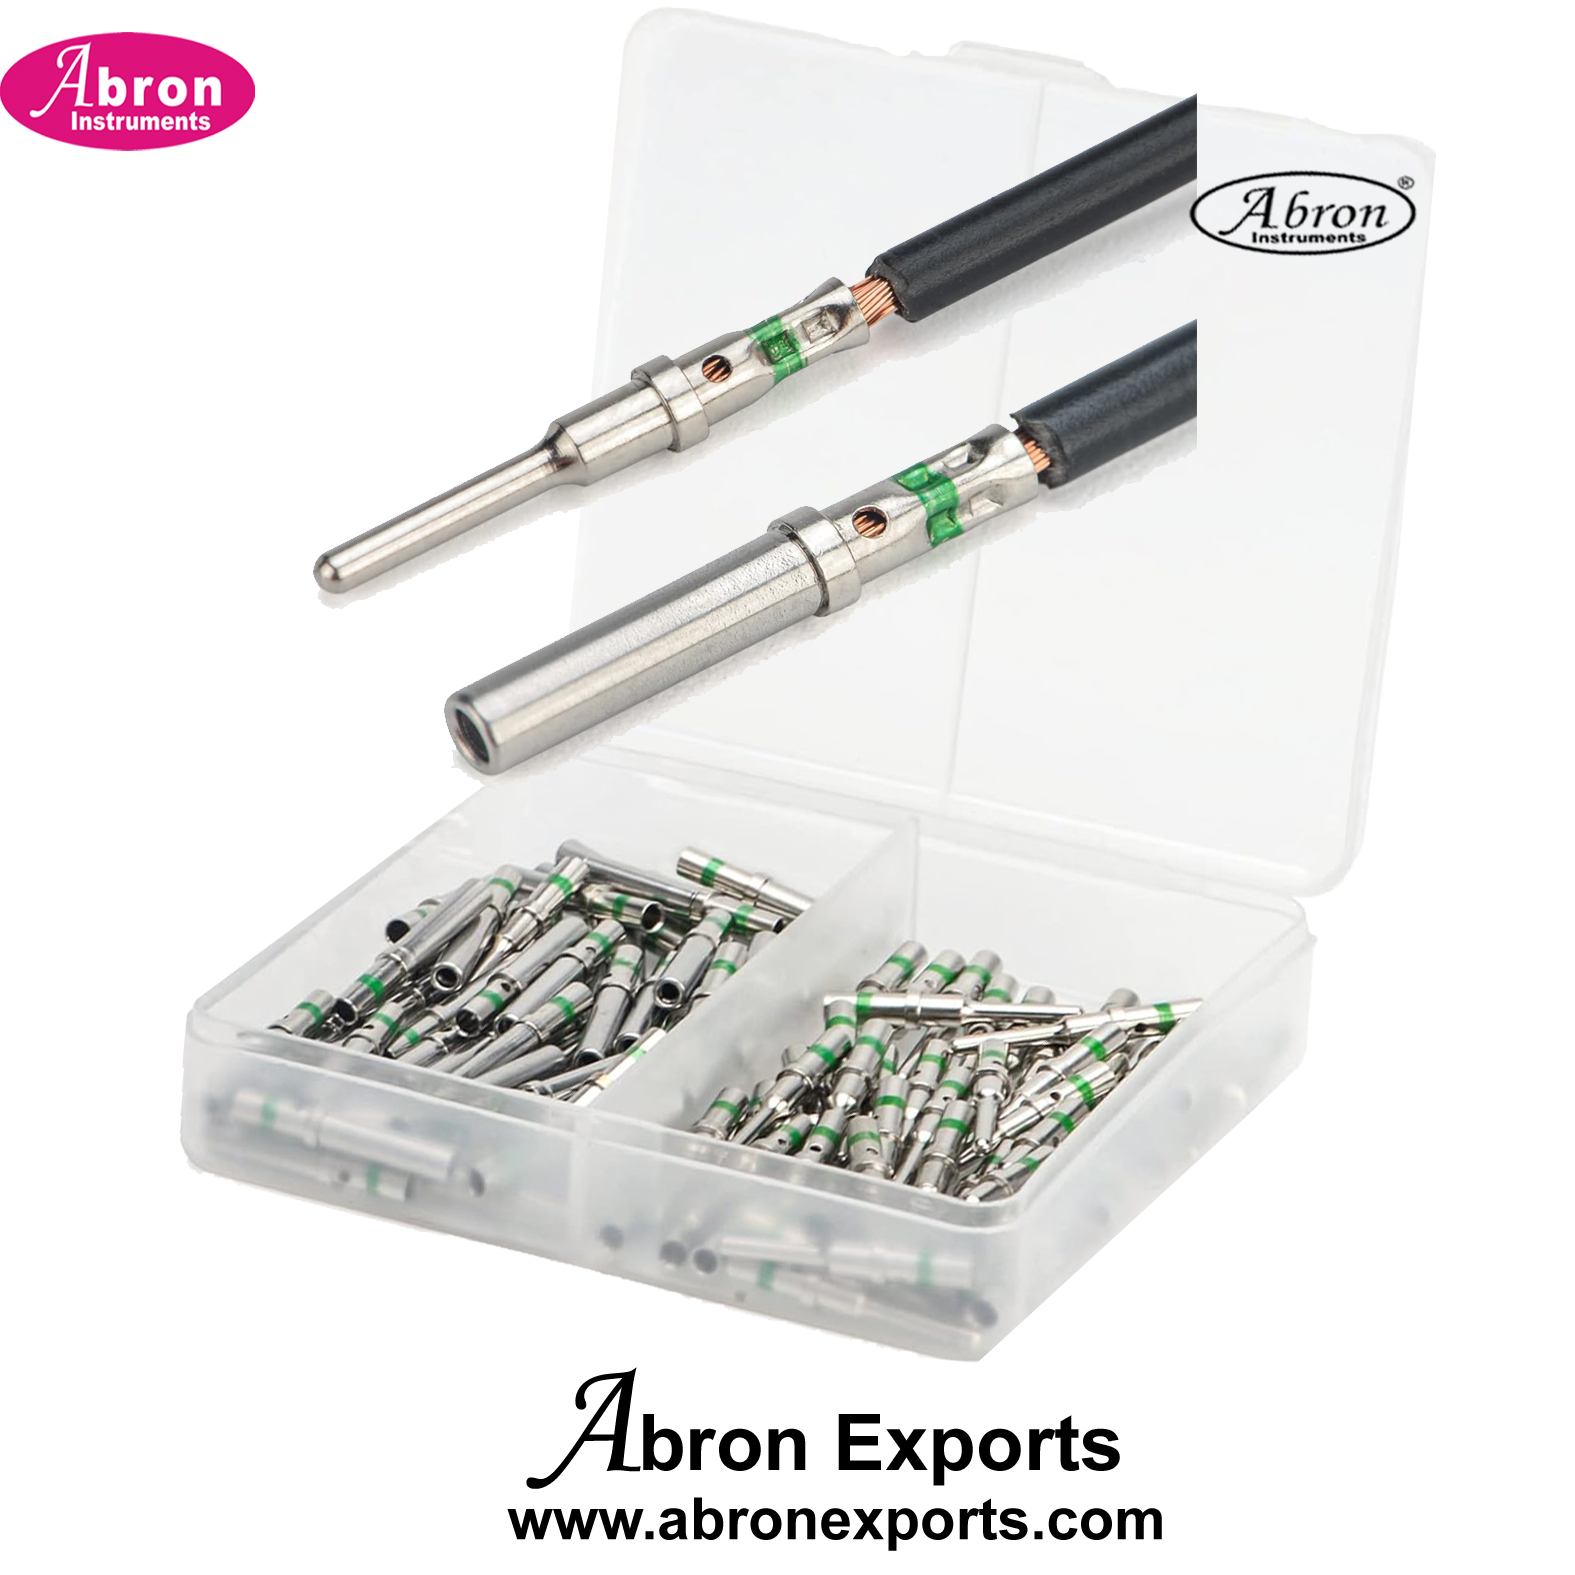 Solid Contract for Wire Male Female Set Size 16 DT Series 50 Pairs Pin and Socket 14AWG Wire in Box Abron AE-1224SC16 